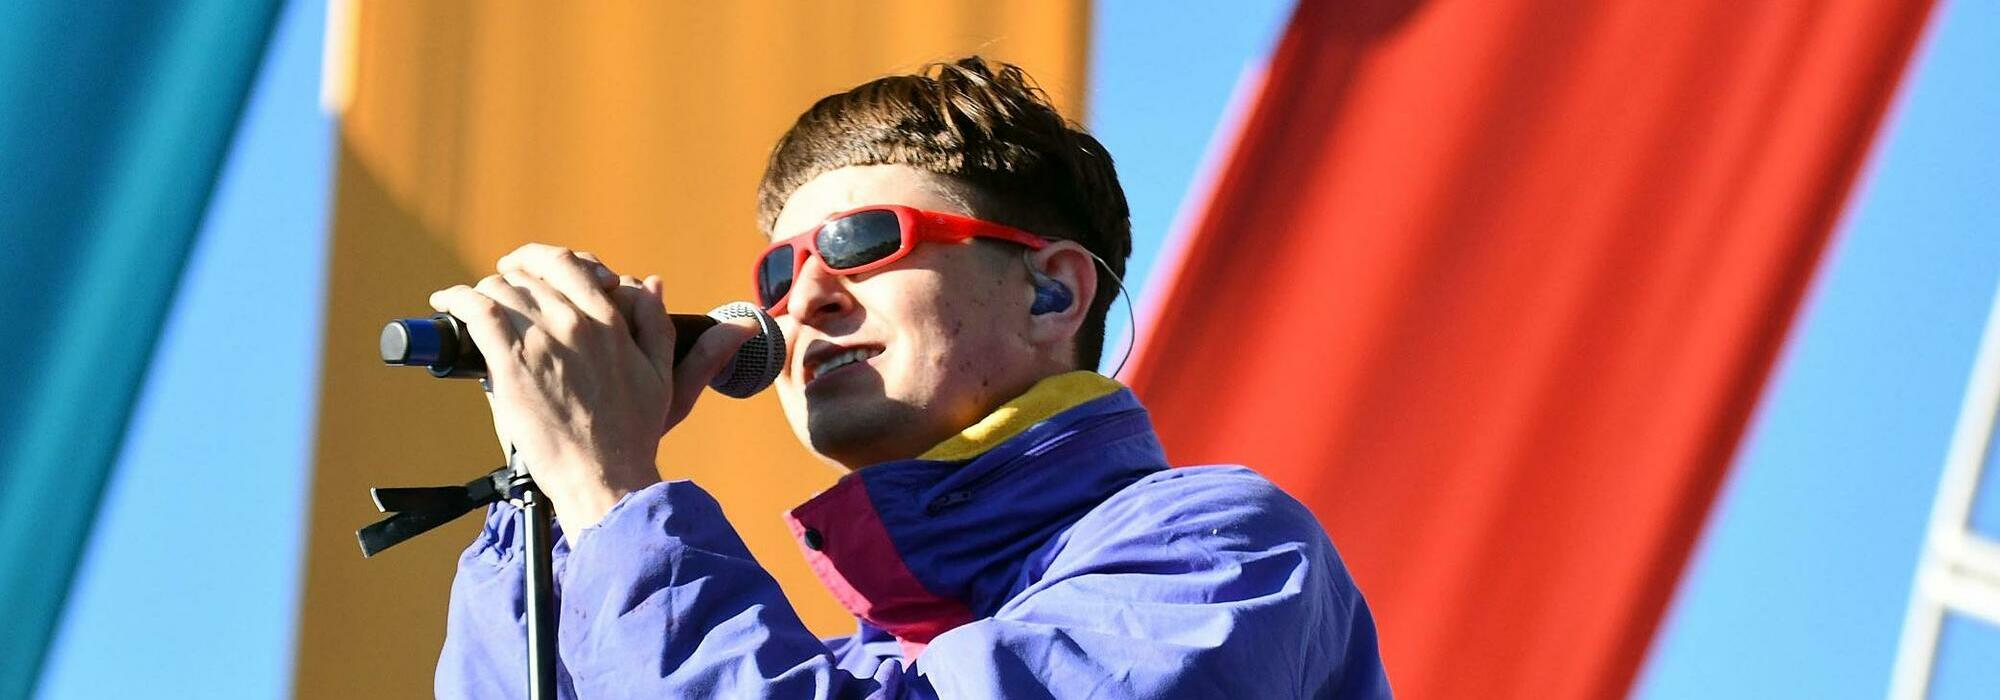 A Oliver Tree live event